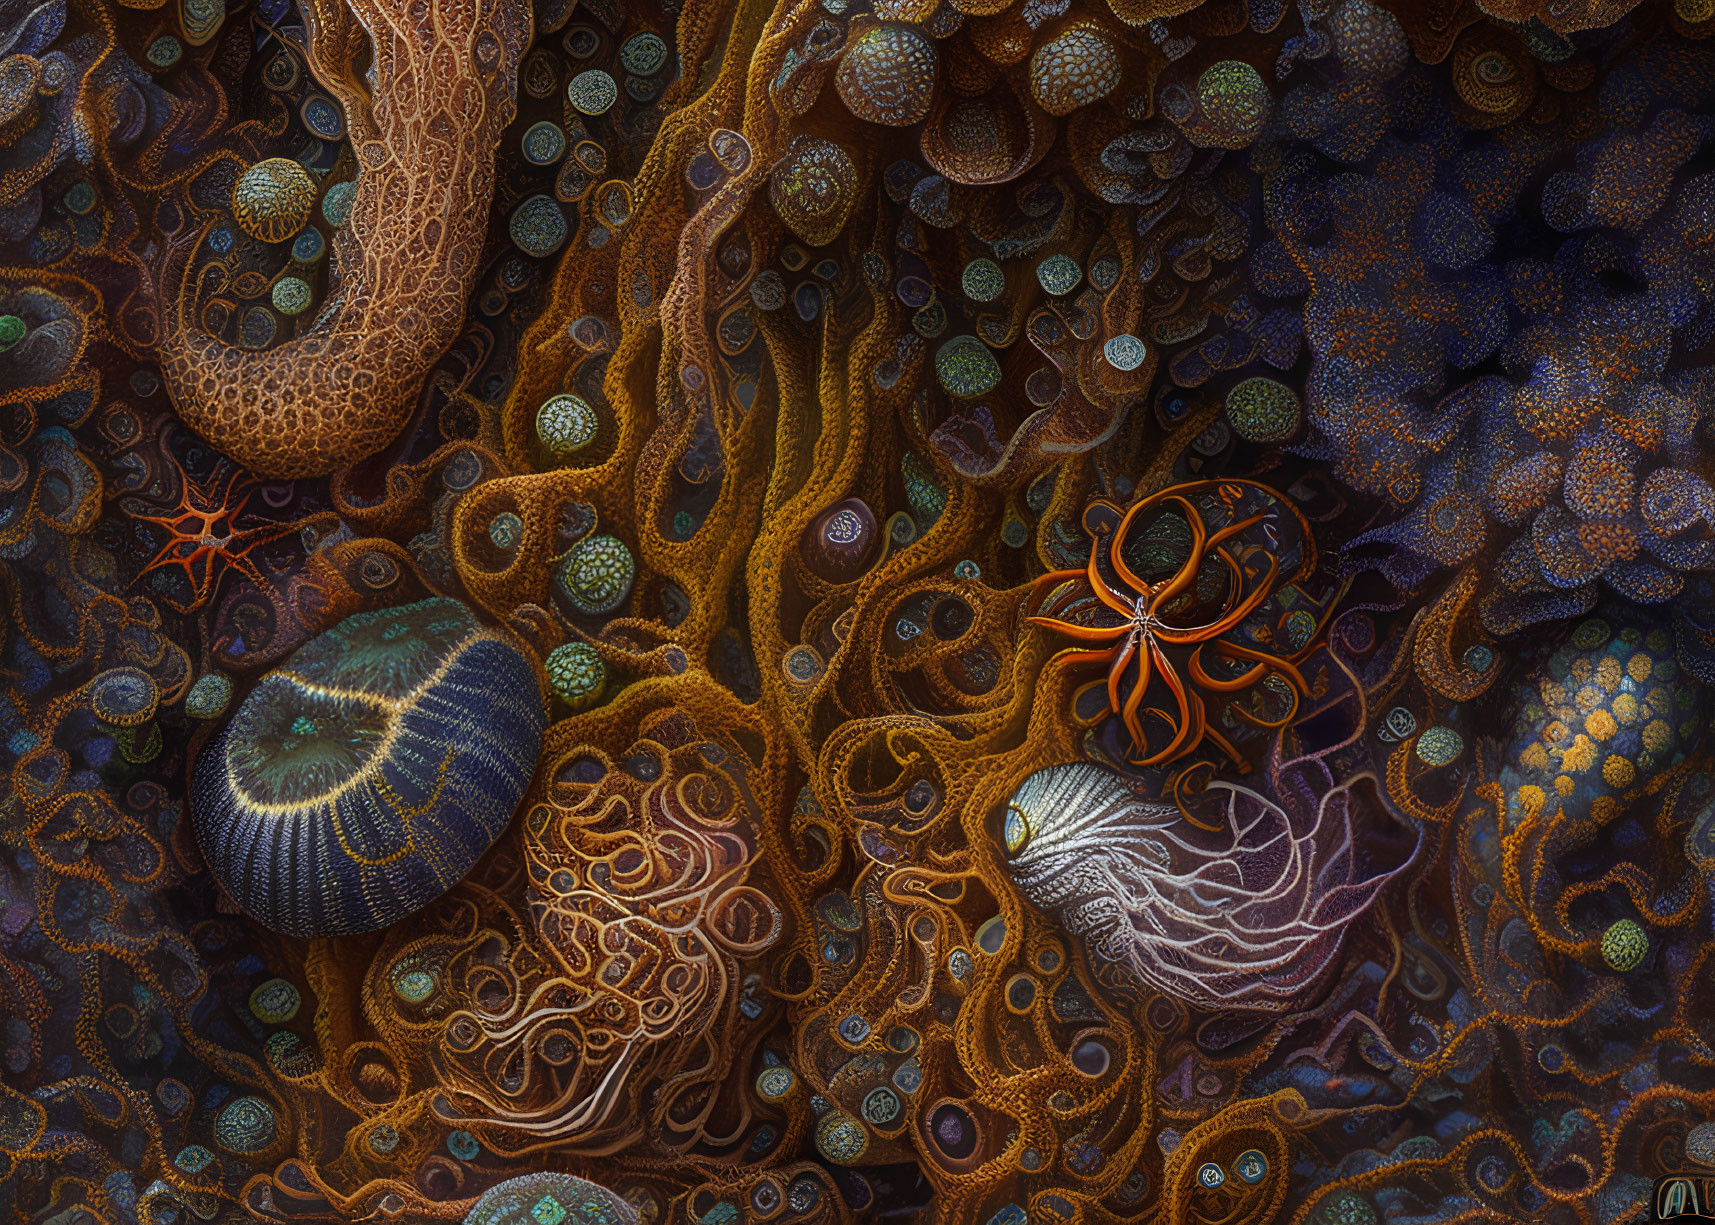 Detailed Fractal-Like Illustration of Fantastical Sea Life and Coral Textures